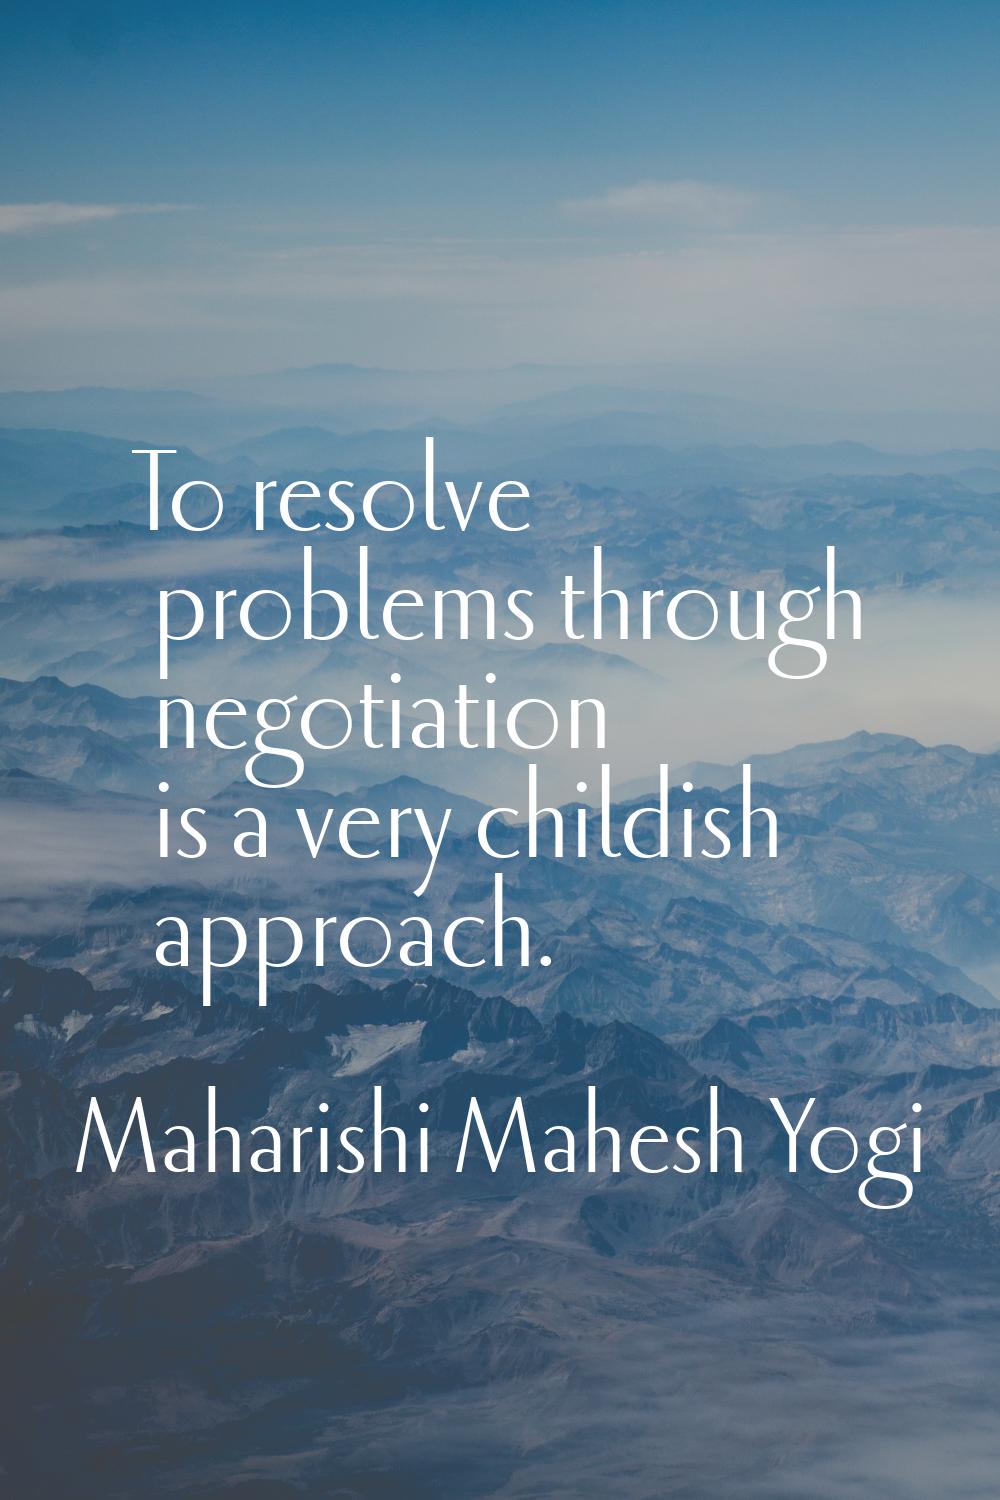 To resolve problems through negotiation is a very childish approach.